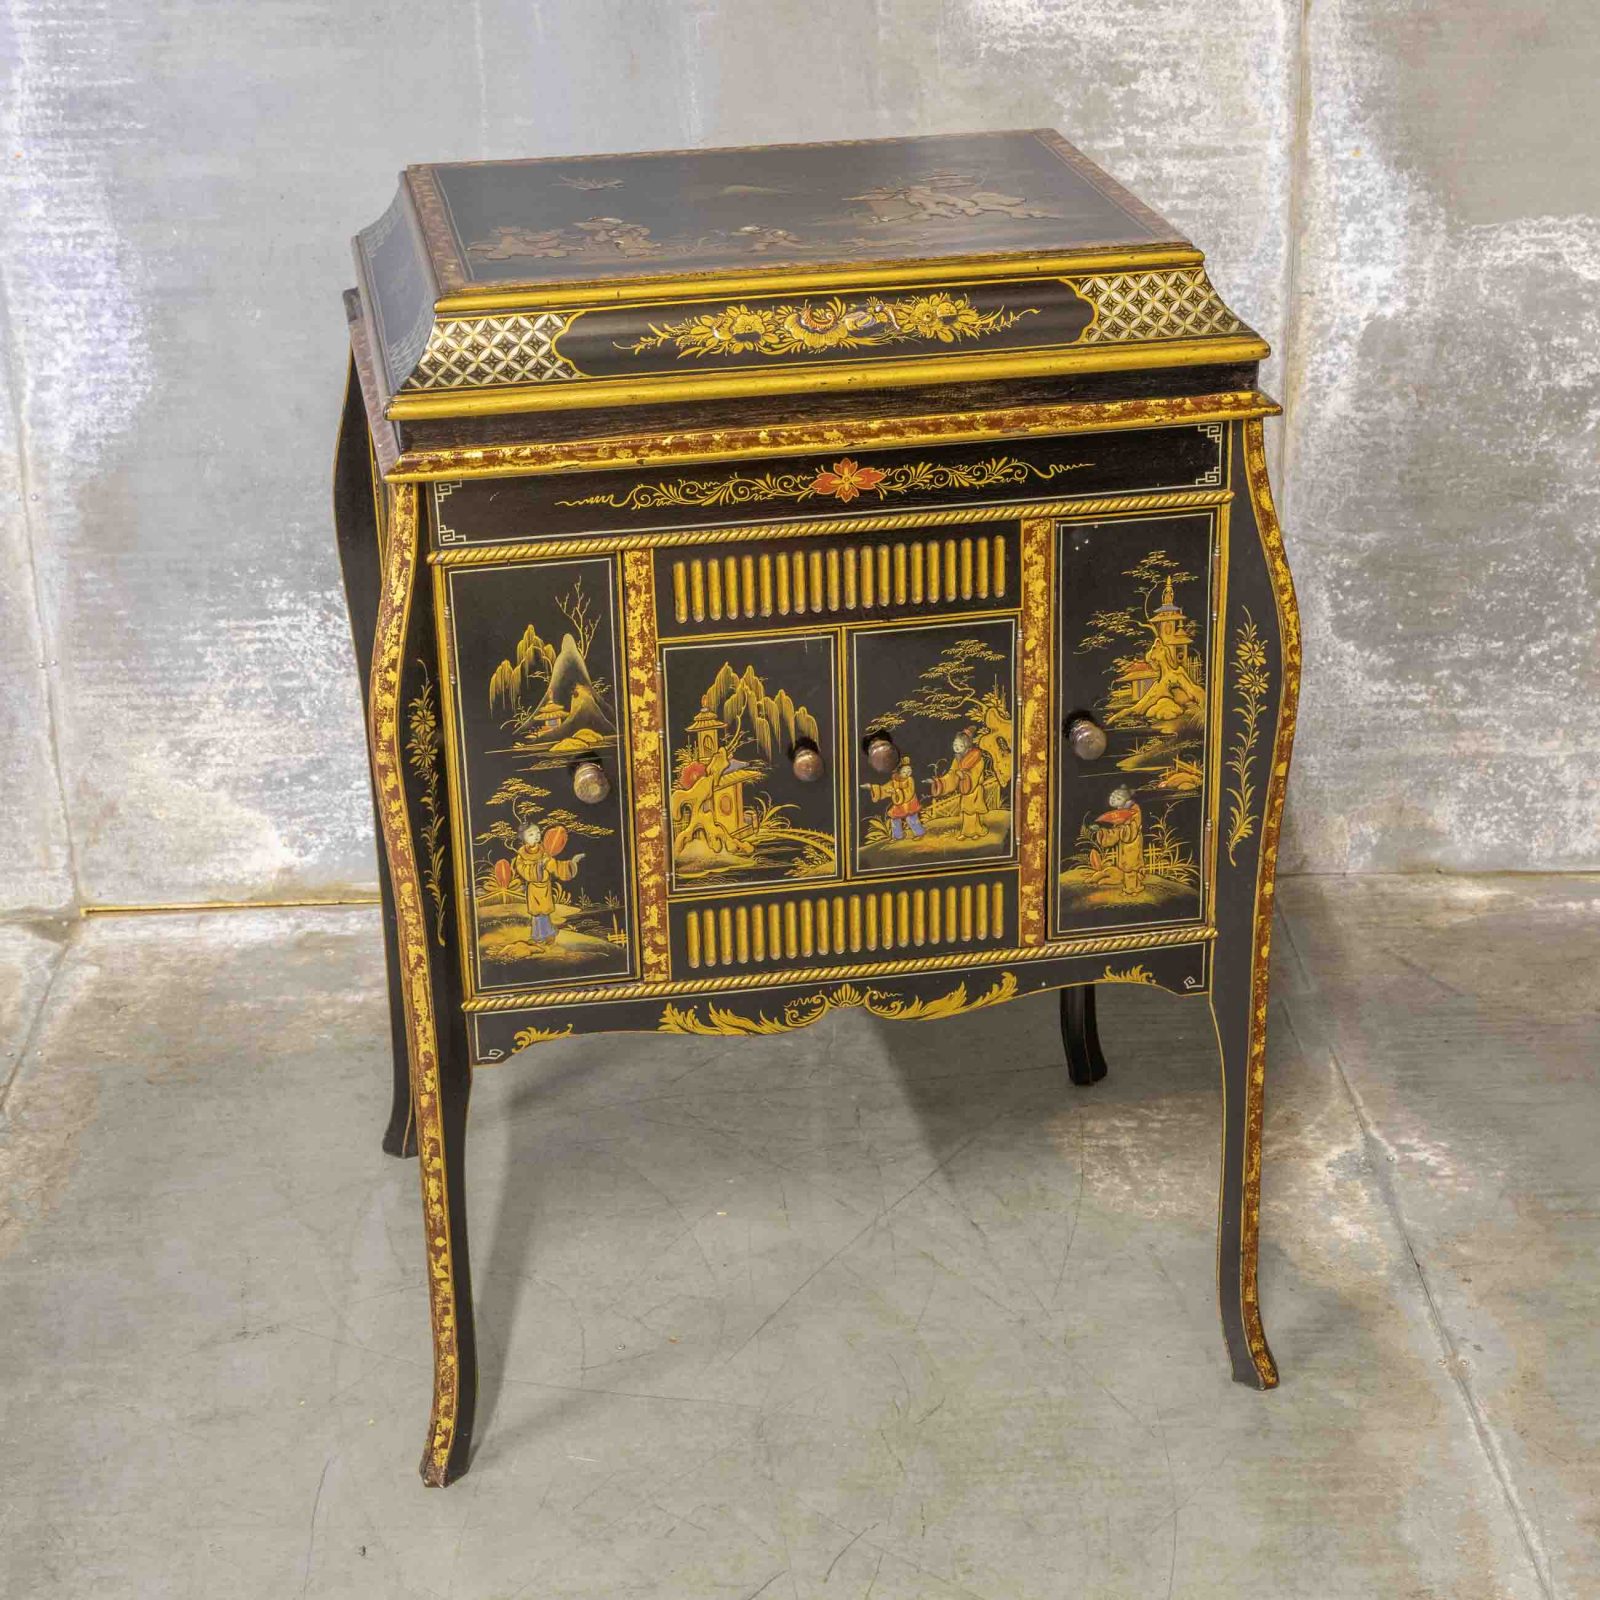 Chinoiserie Drinks Cabinet